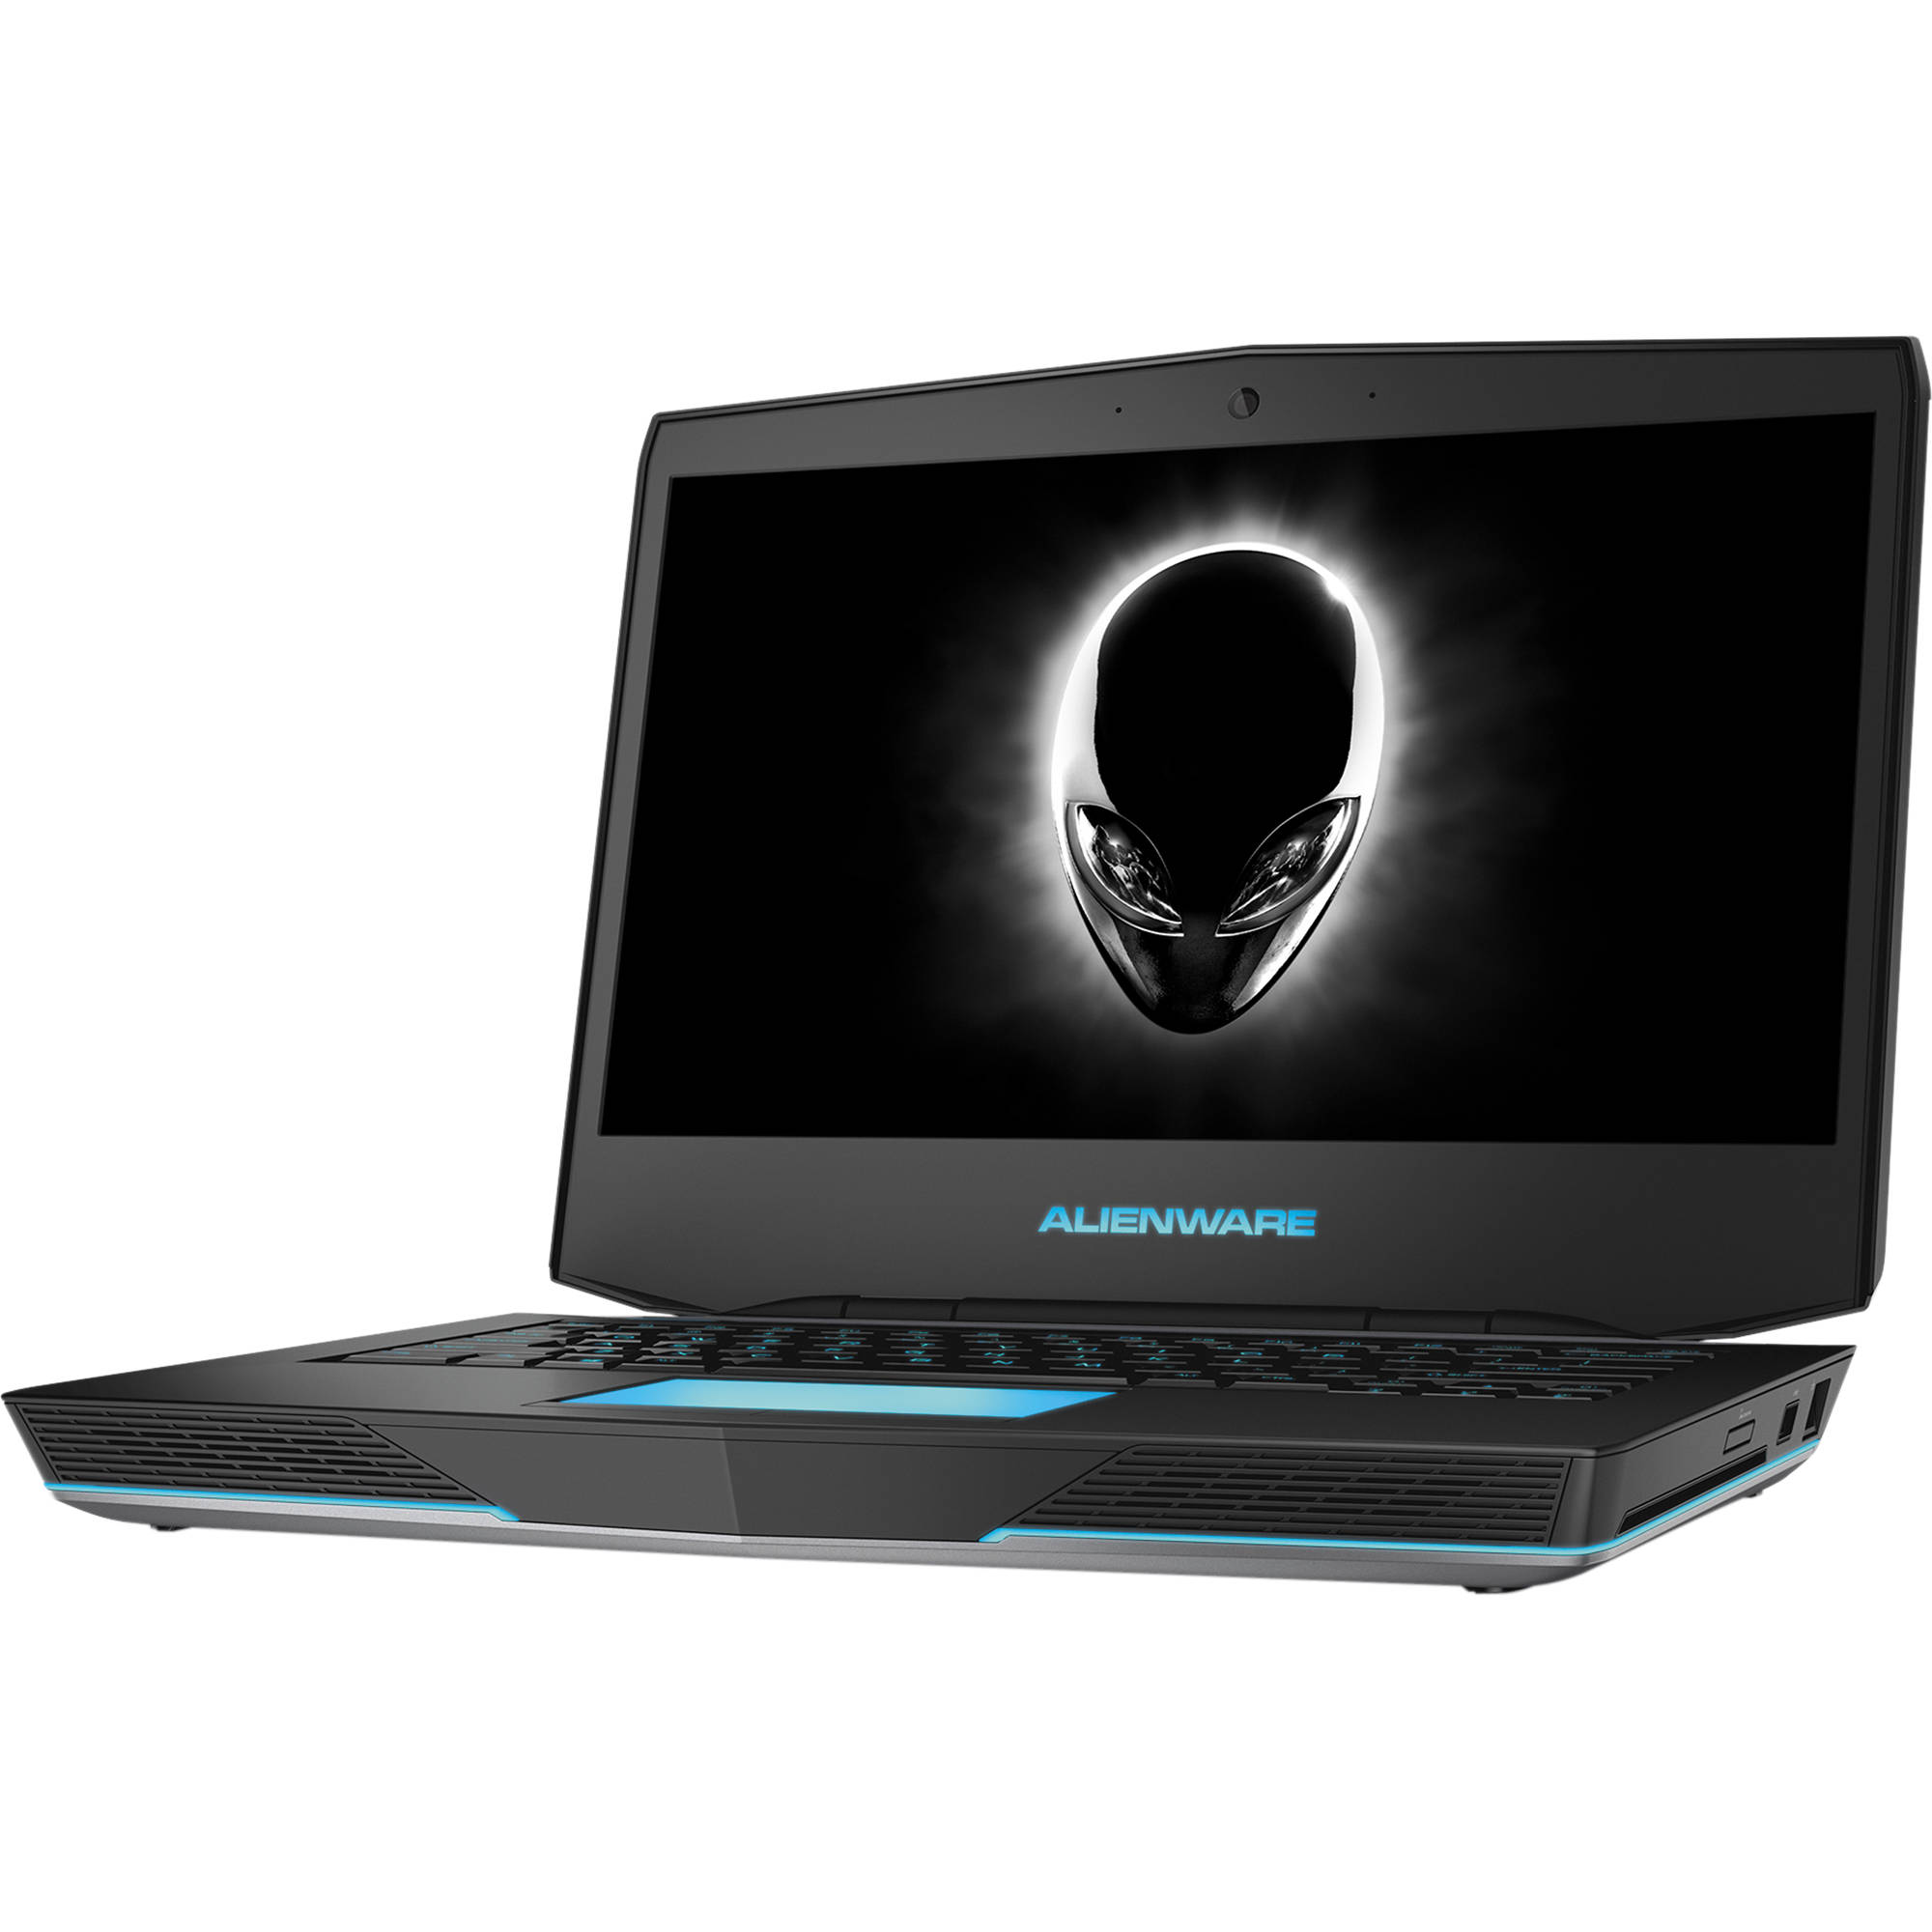 Dell Alienware 13 Anw13 2273s 13 Laptop Anw13 2273slv